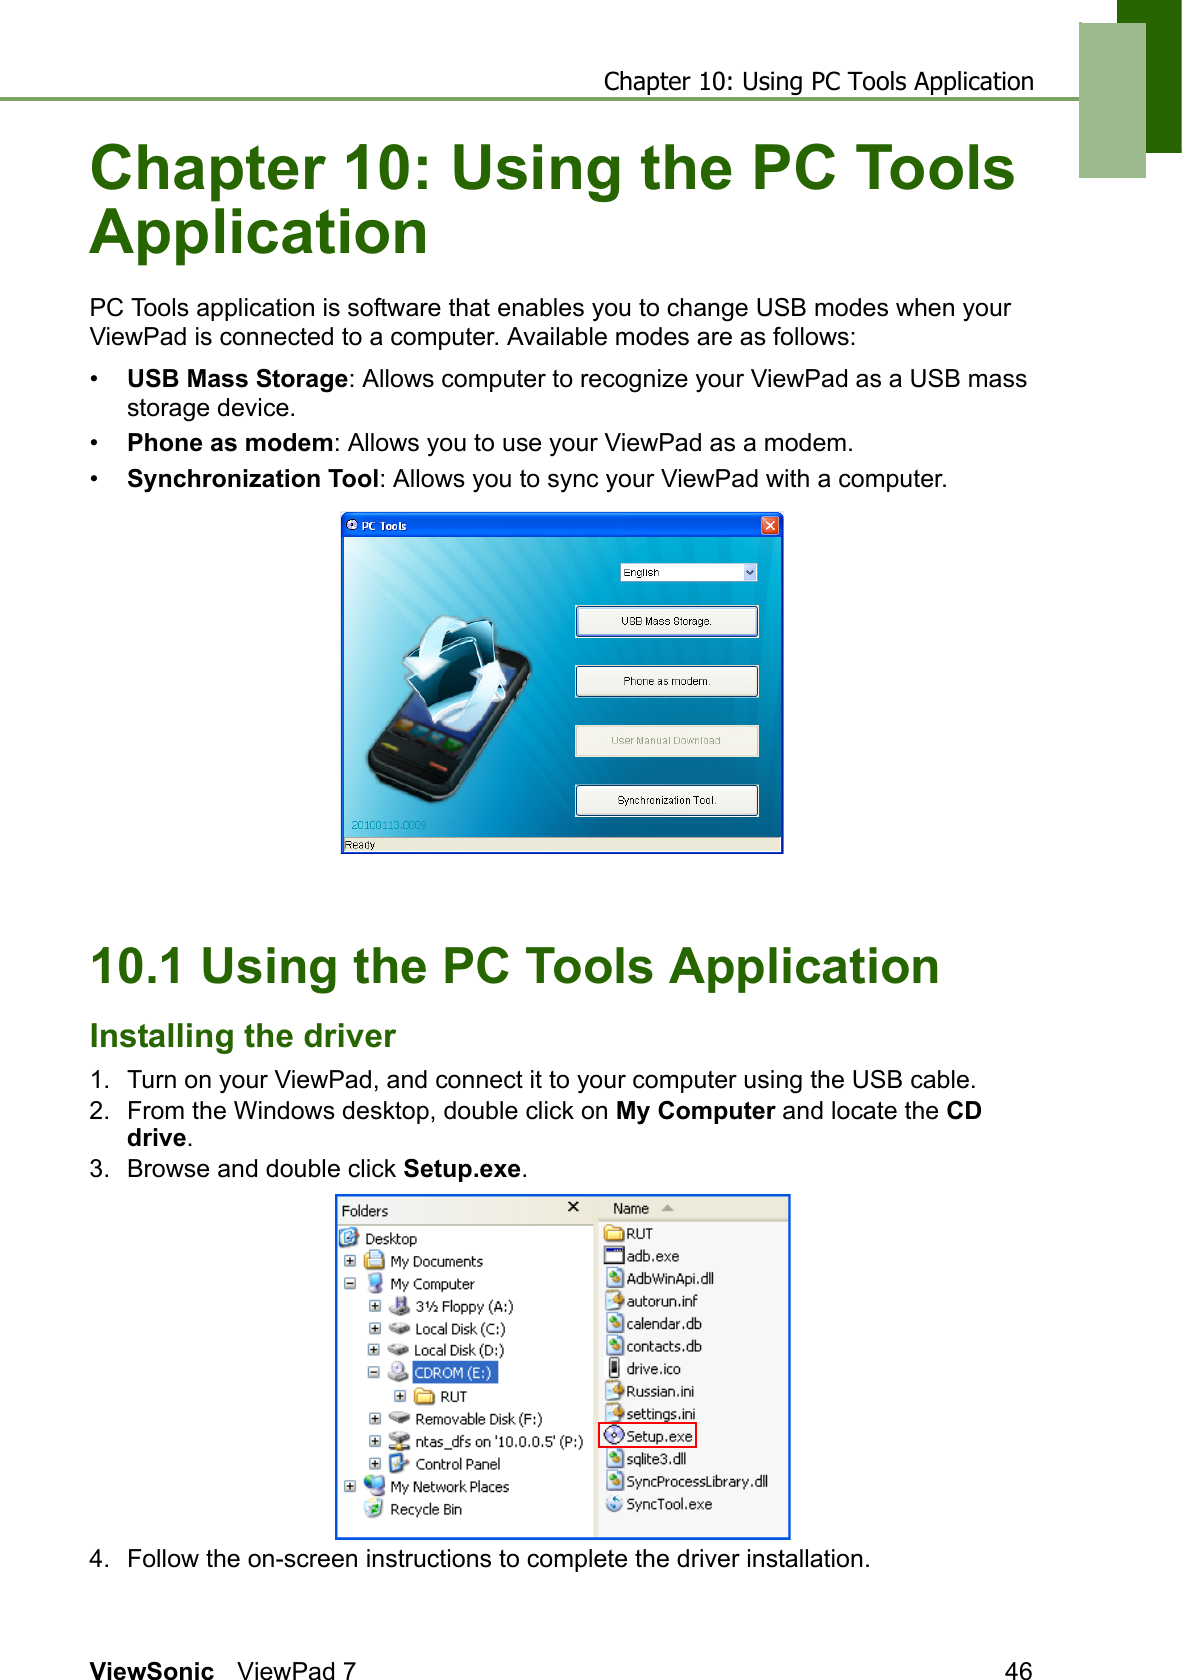 Chapter 10: Using PC Tools ApplicationViewSonic ViewPad 7 46Chapter 10: Using the PC Tools ApplicationPC Tools application is software that enables you to change USB modes when your ViewPad is connected to a computer. Available modes are as follows:•USB Mass Storage: Allows computer to recognize your ViewPad as a USB mass storage device.•Phone as modem: Allows you to use your ViewPad as a modem.•Synchronization Tool: Allows you to sync your ViewPad with a computer.10.1 Using the PC Tools ApplicationInstalling the driver1. Turn on your ViewPad, and connect it to your computer using the USB cable.2. From the Windows desktop, double click on My Computer and locate the CD drive.3. Browse and double click Setup.exe.4. Follow the on-screen instructions to complete the driver installation.